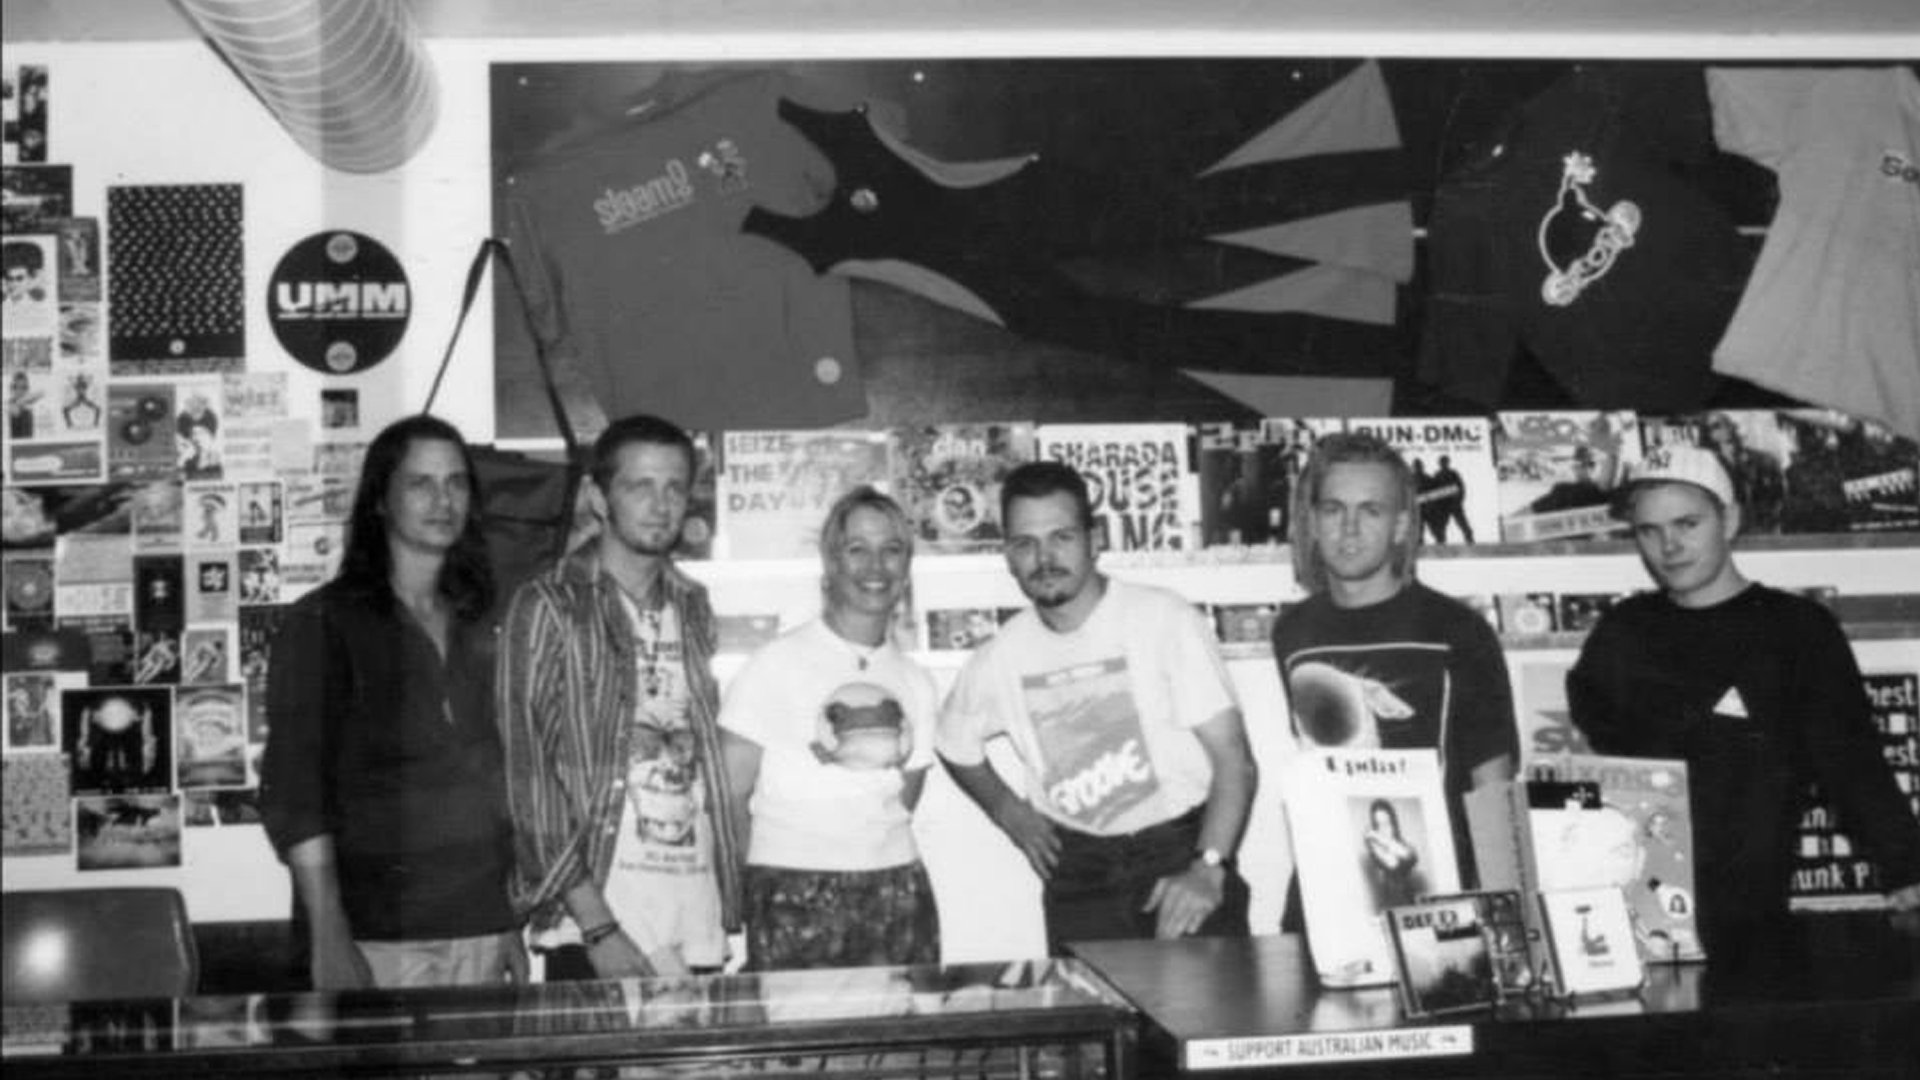 Courtesy of Roger Ramjet - Chris Fraser Far Right - Underground Music Movement Record Store - The Academy Story.jpg